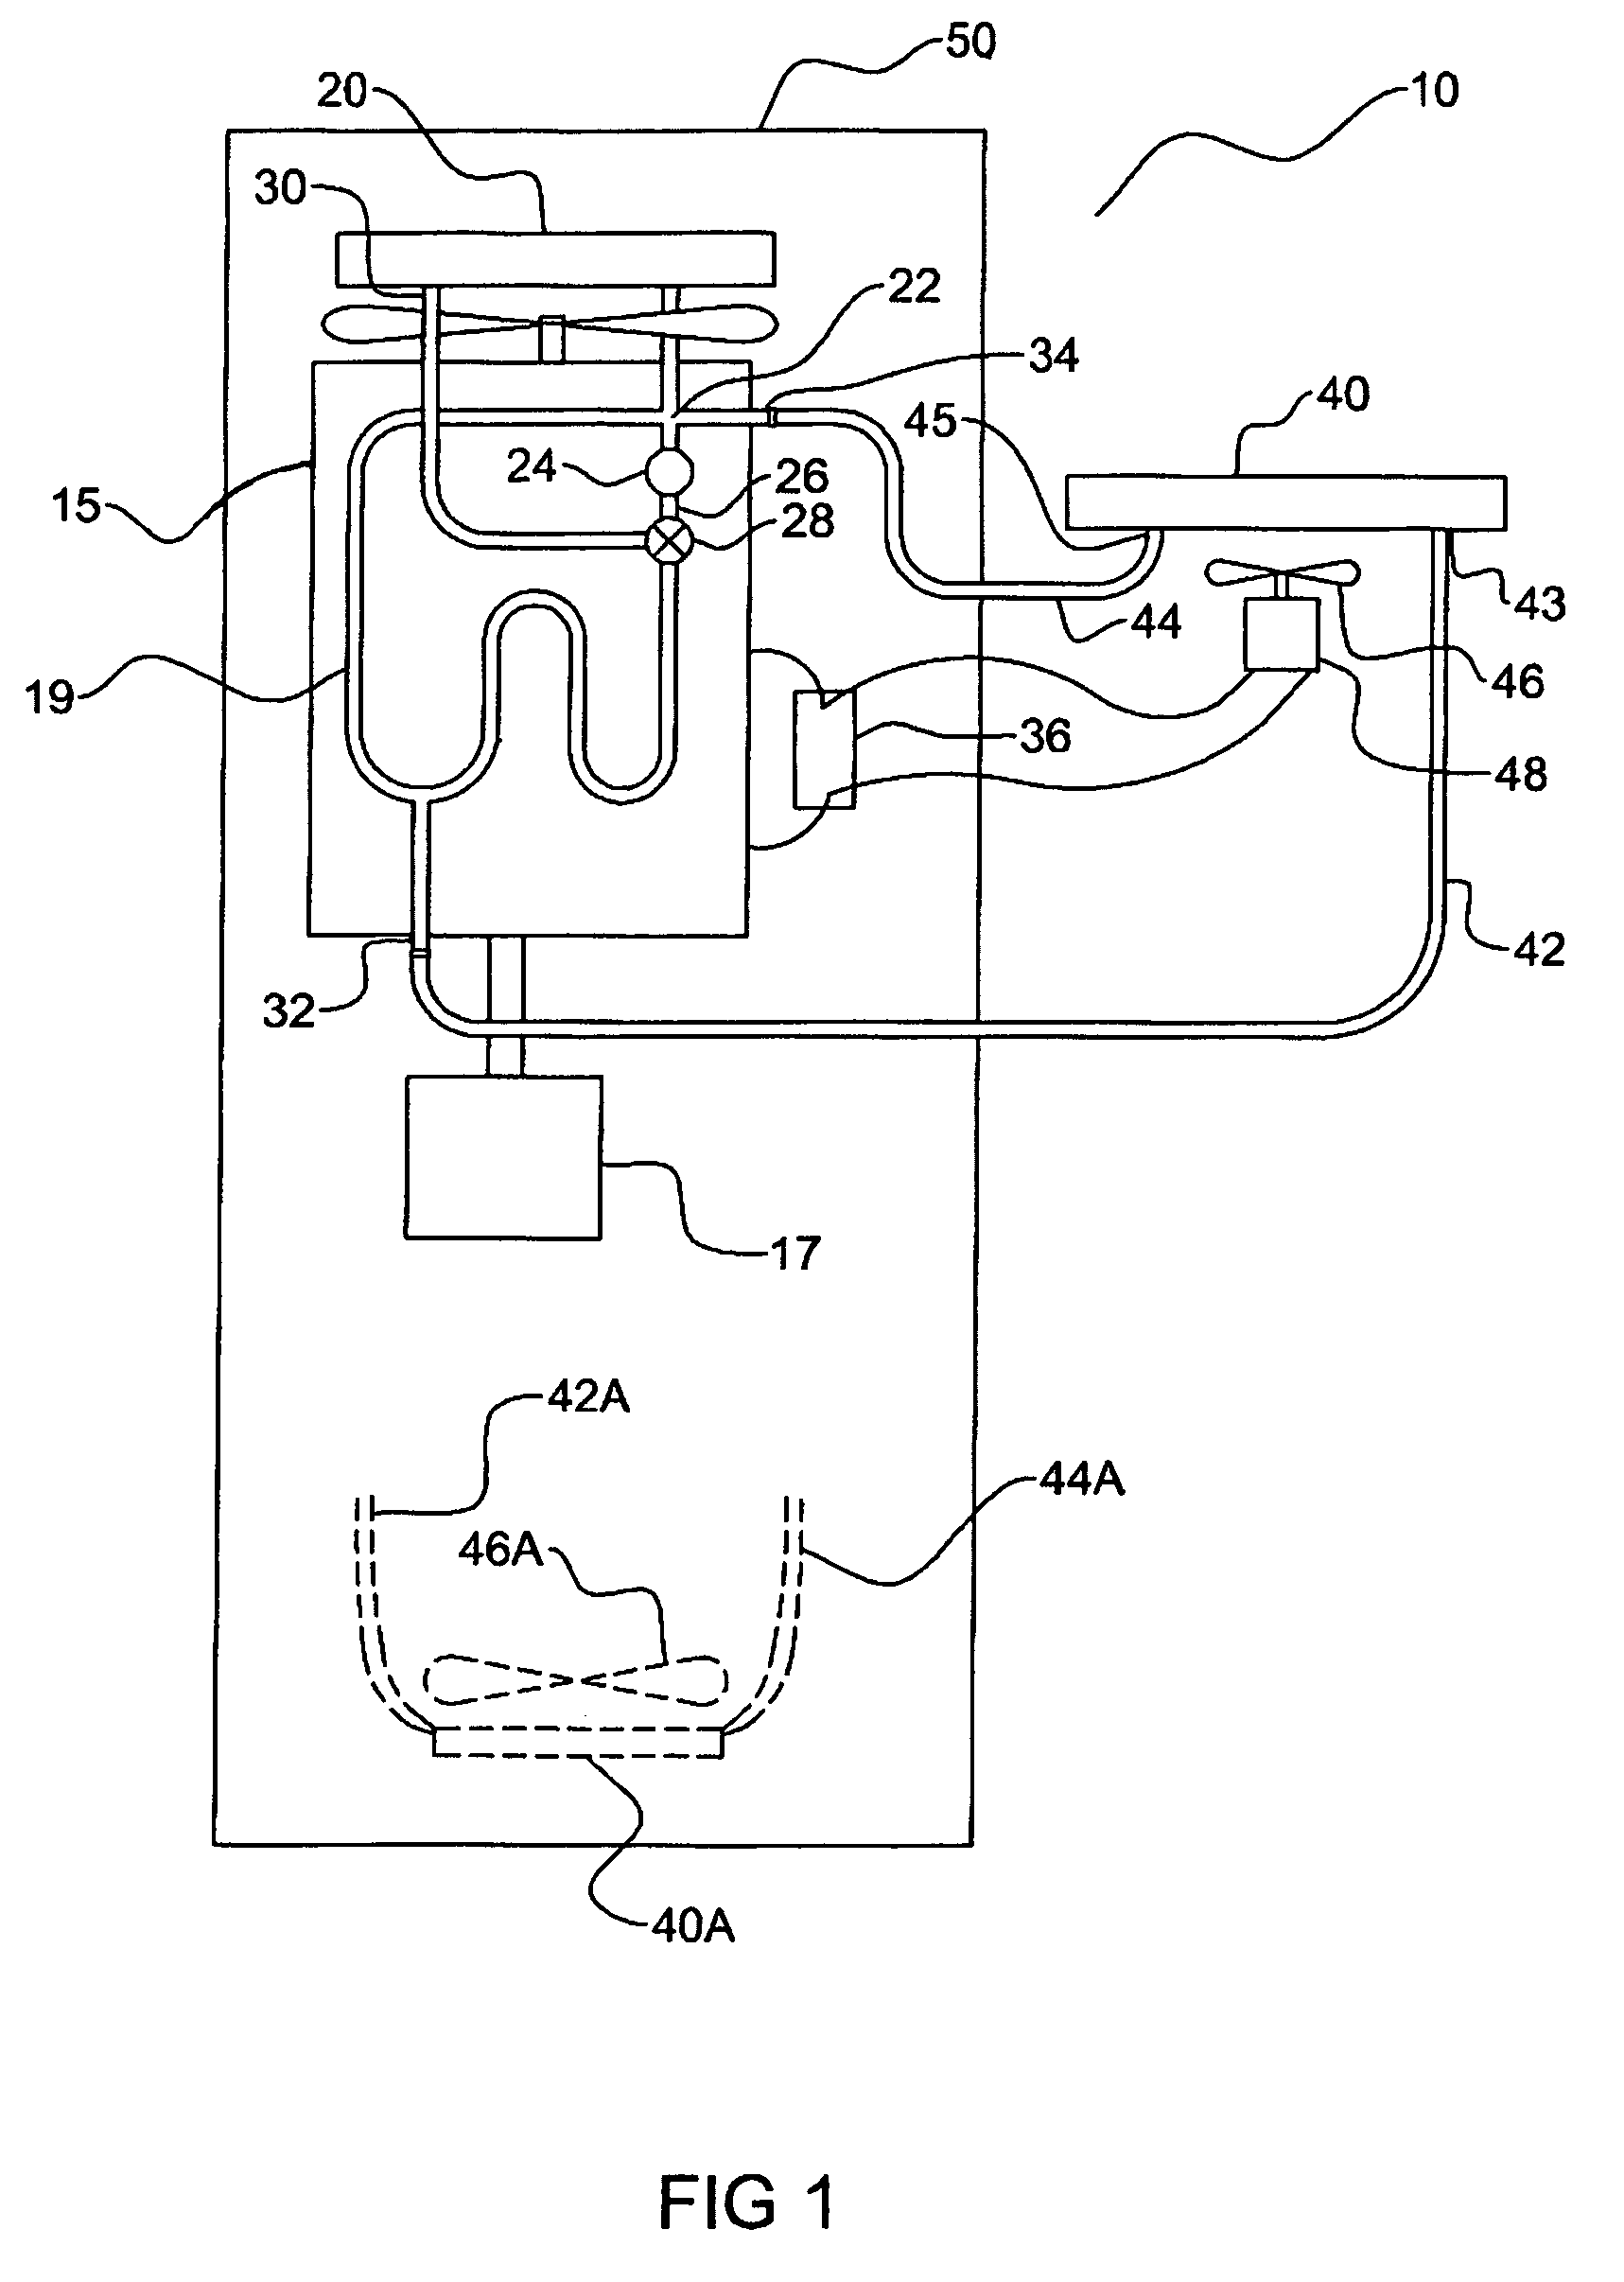 Method and apparatus for cooling engines in buildings at oil well sites and the like